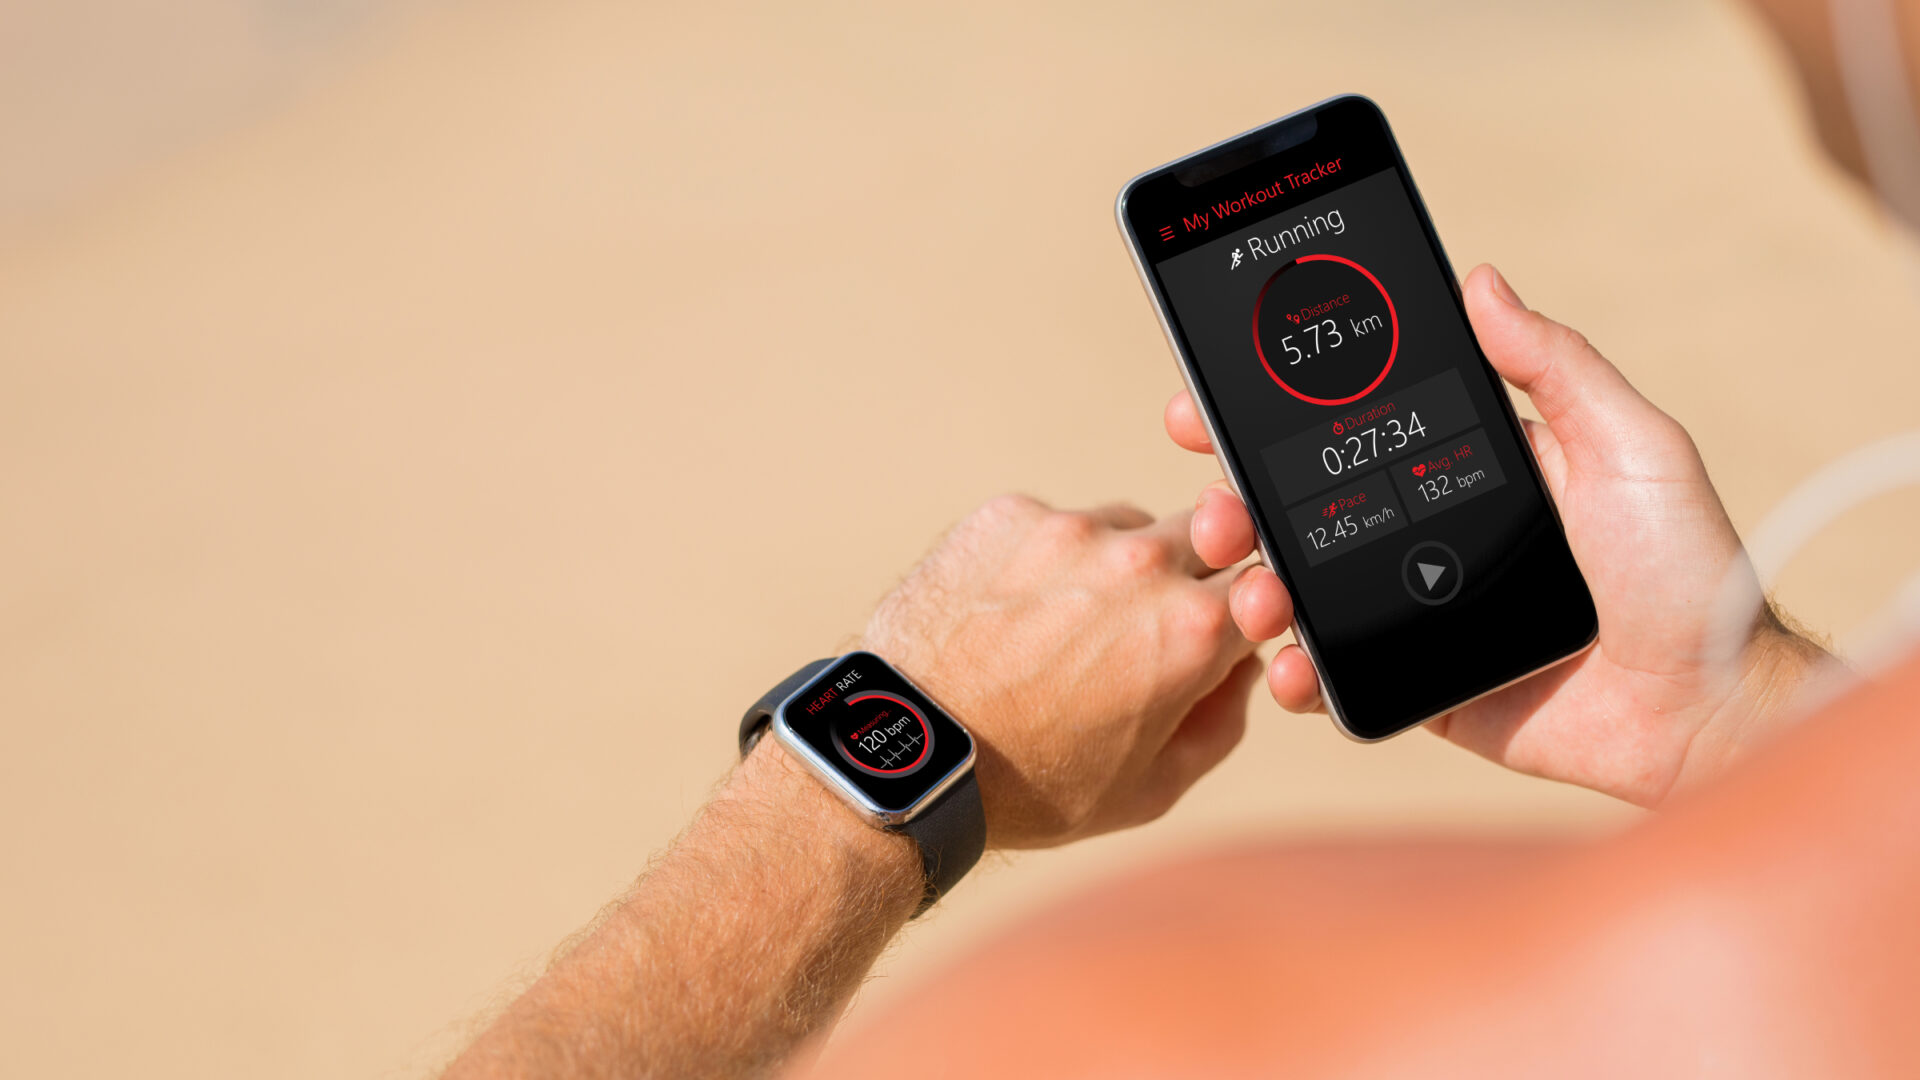 Athlete comparing fitness data on their watch with their smartphone